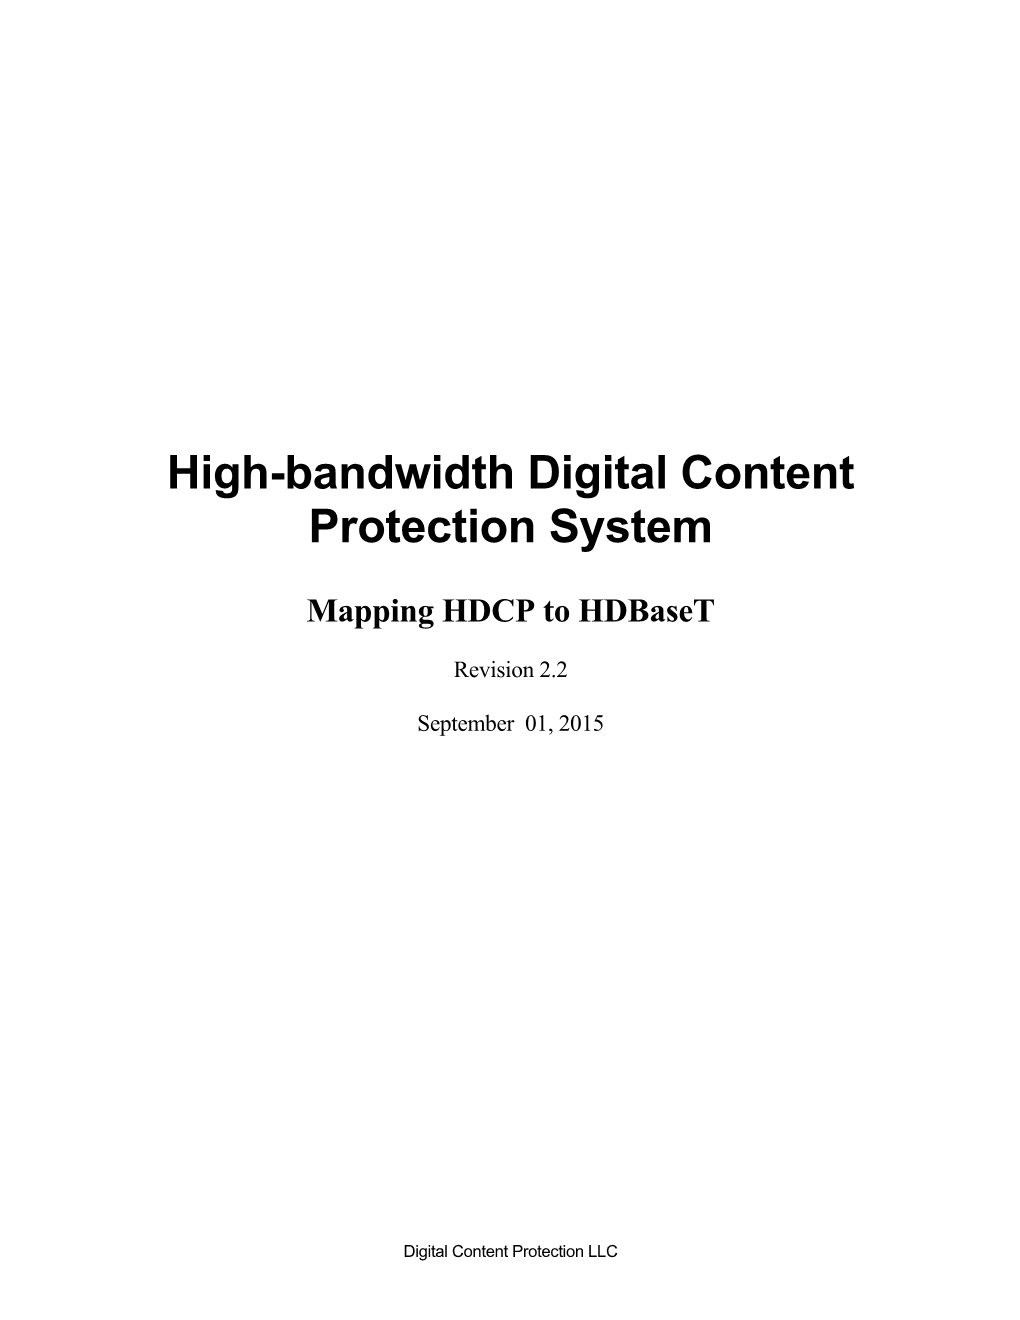 HDCP 2.2 on Hdbaset Specification